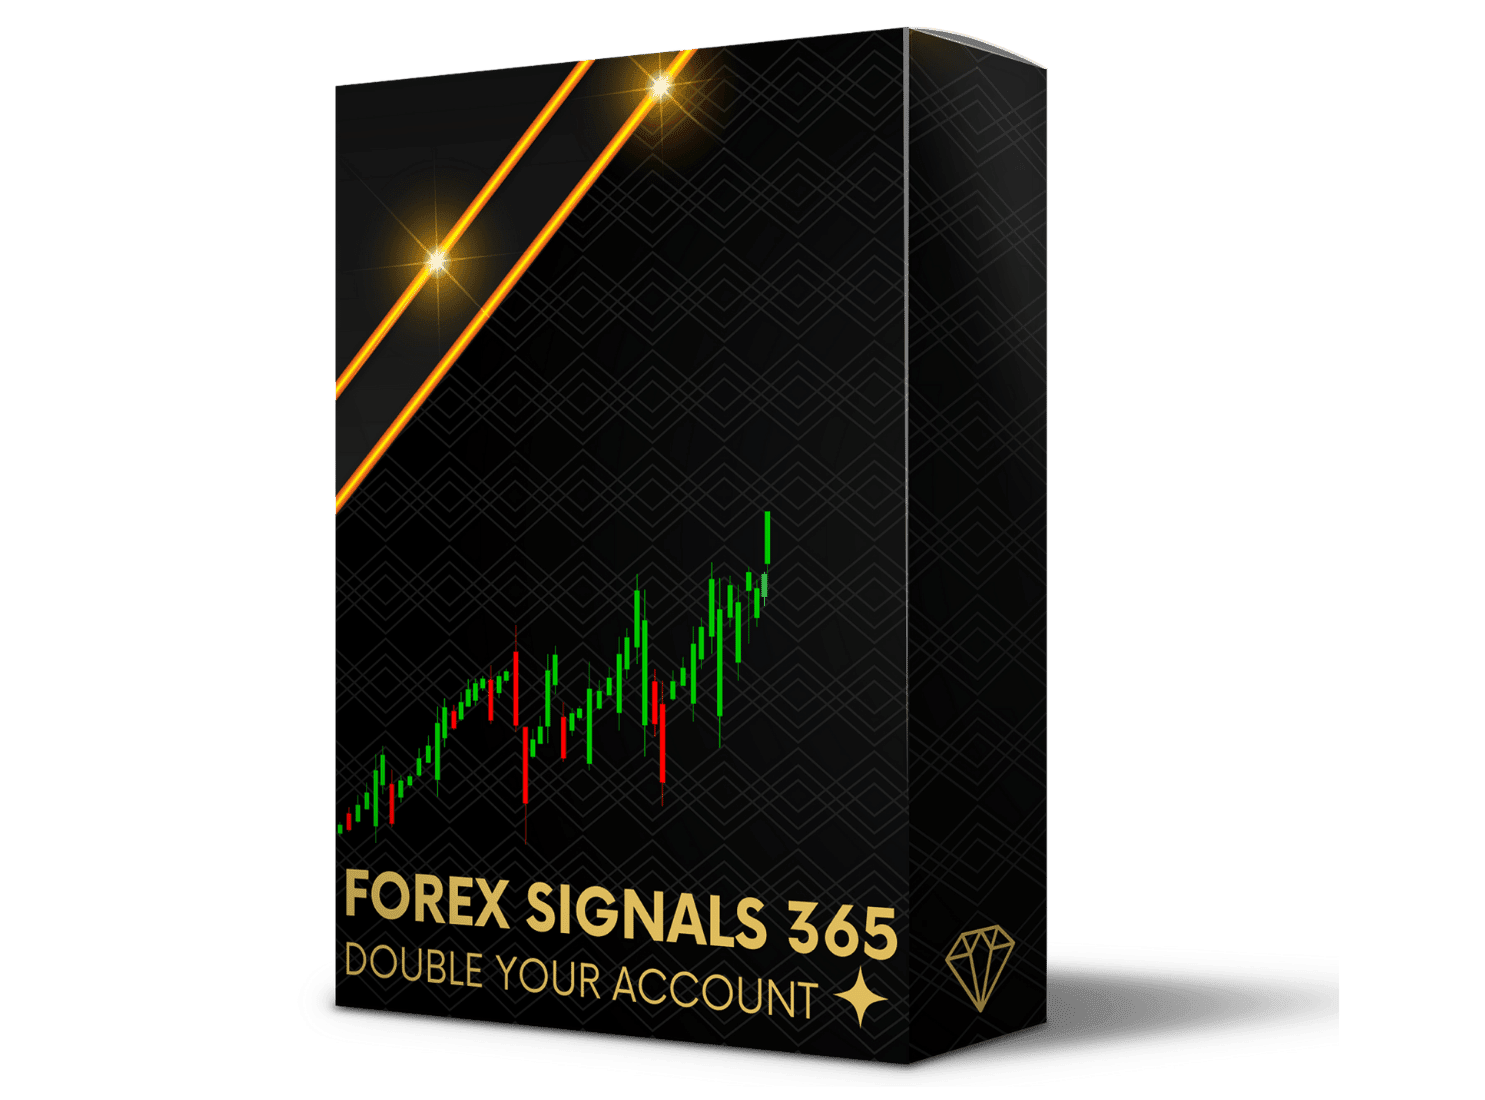 pay now forex signals 365 double account forexsignals365.com